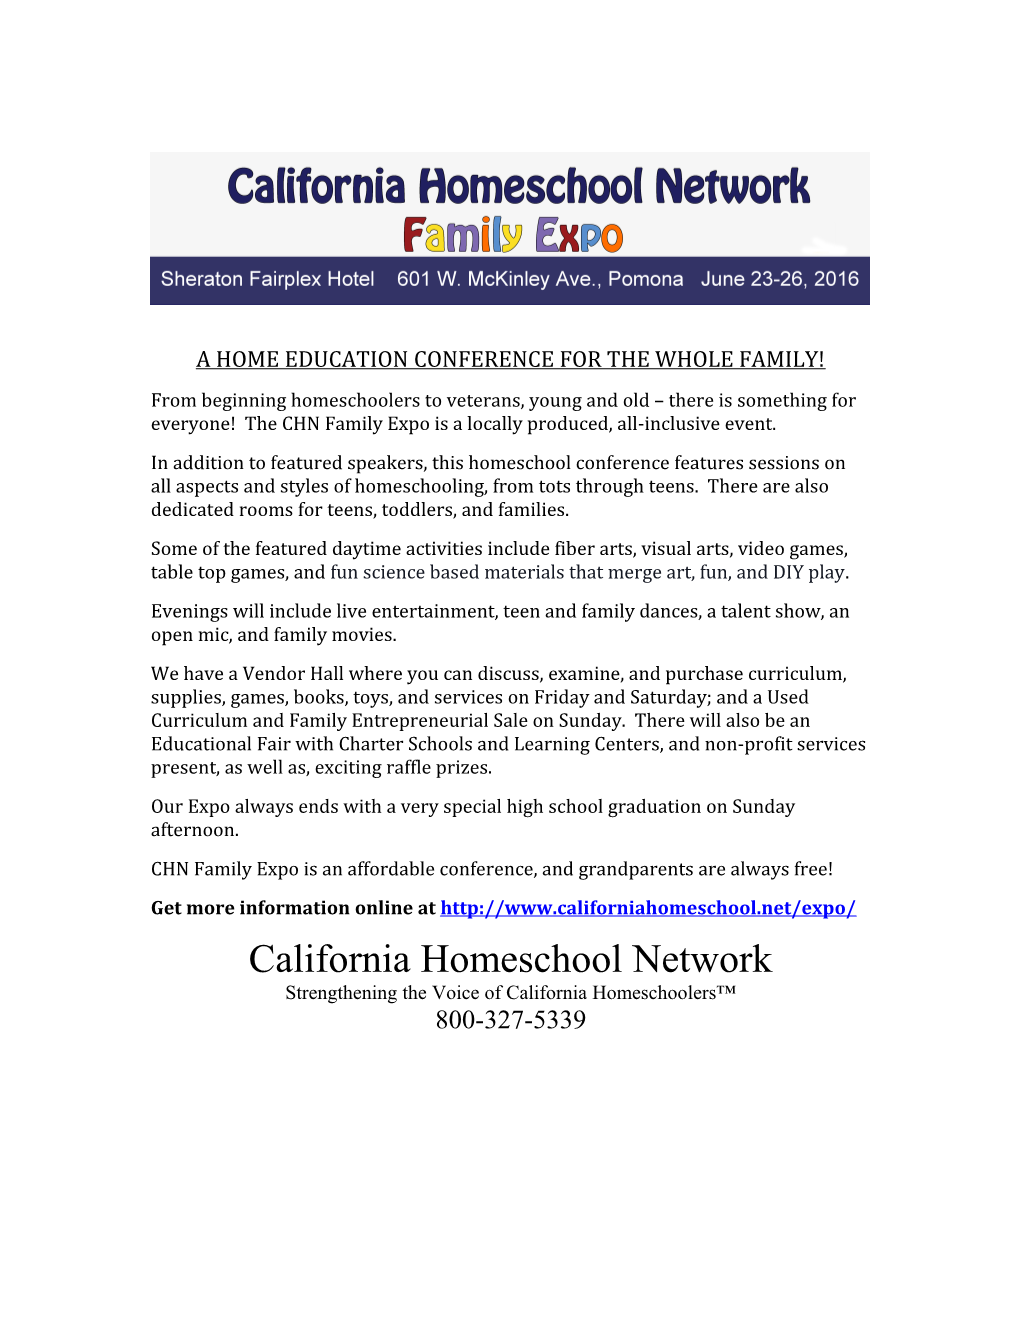 A Home Education Conference for the Whole Family!